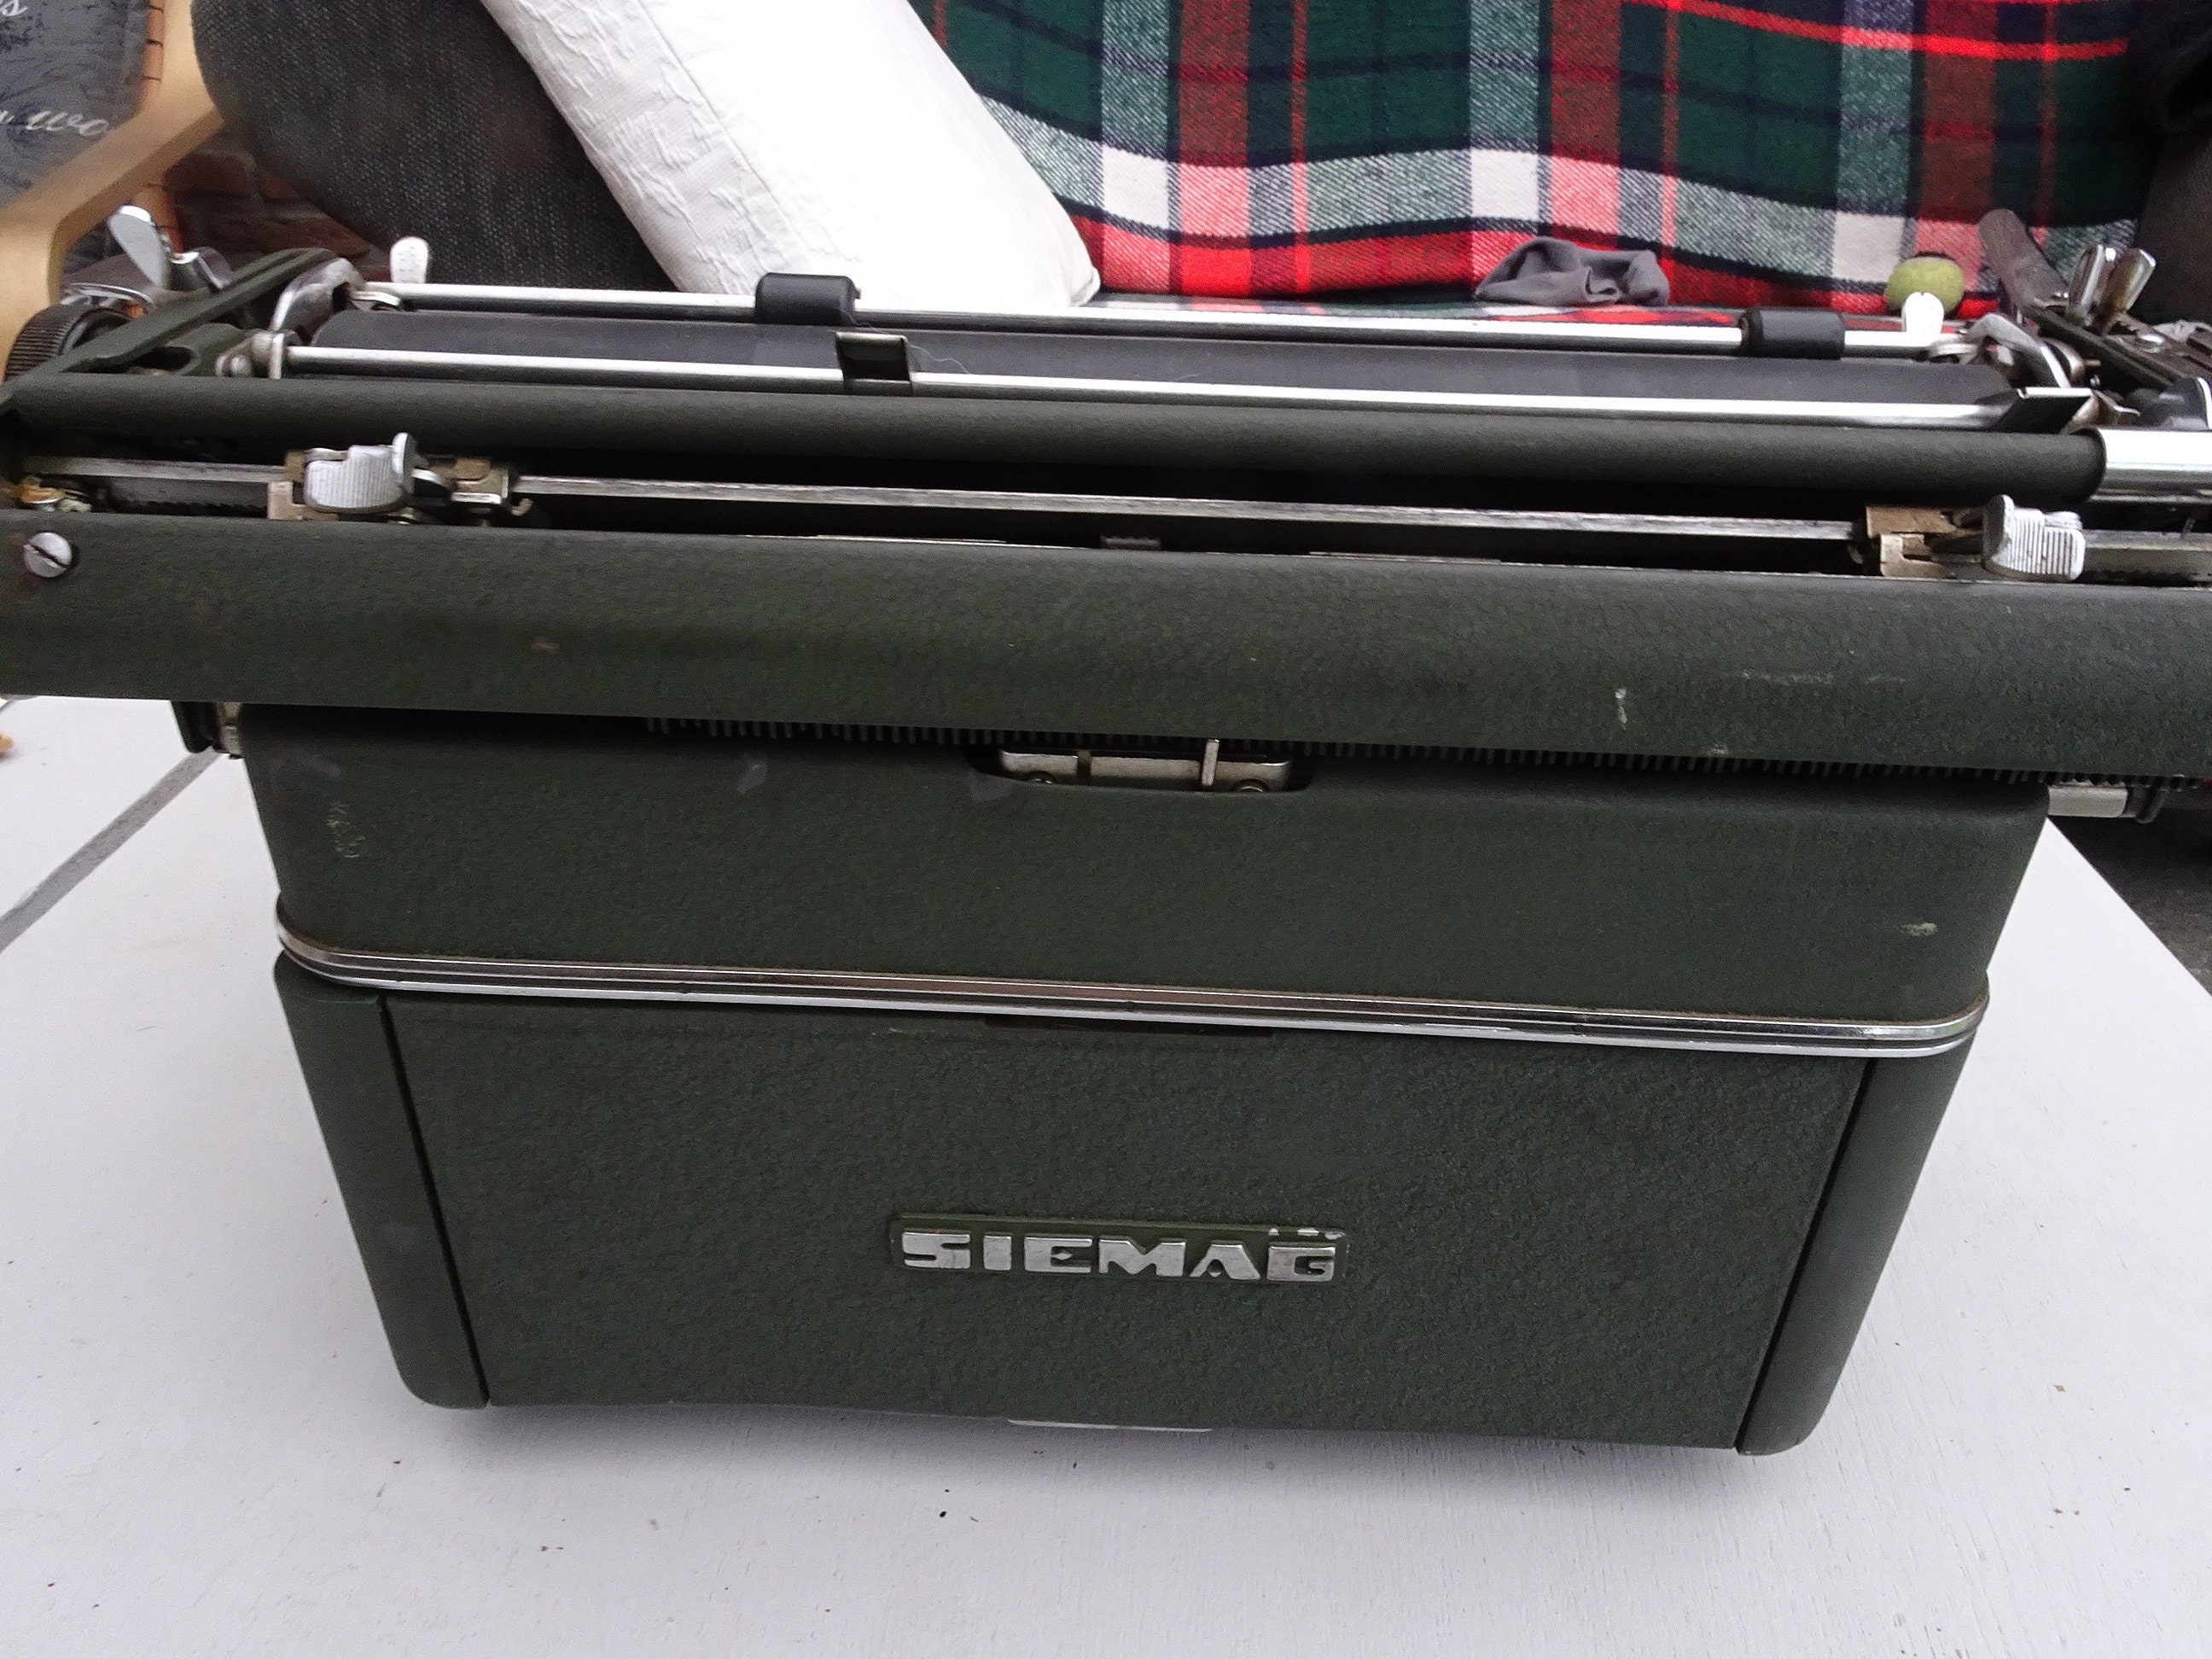 Siemag II T, Nice Typewriter From 1951, Not Operational -  Canada